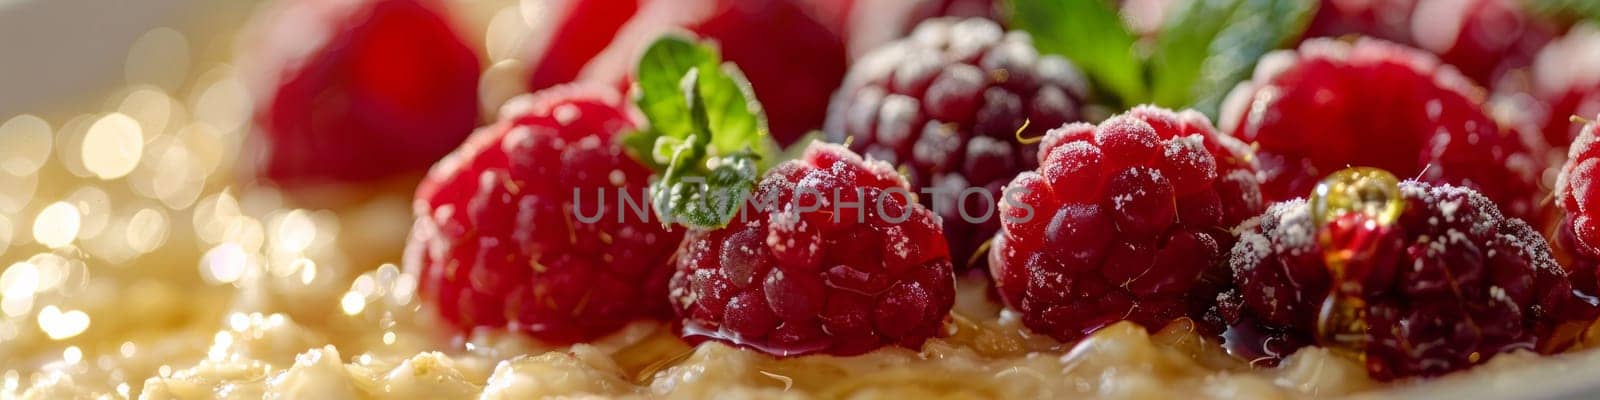 A close up of a bowl filled with raspberries and other berries, AI by starush